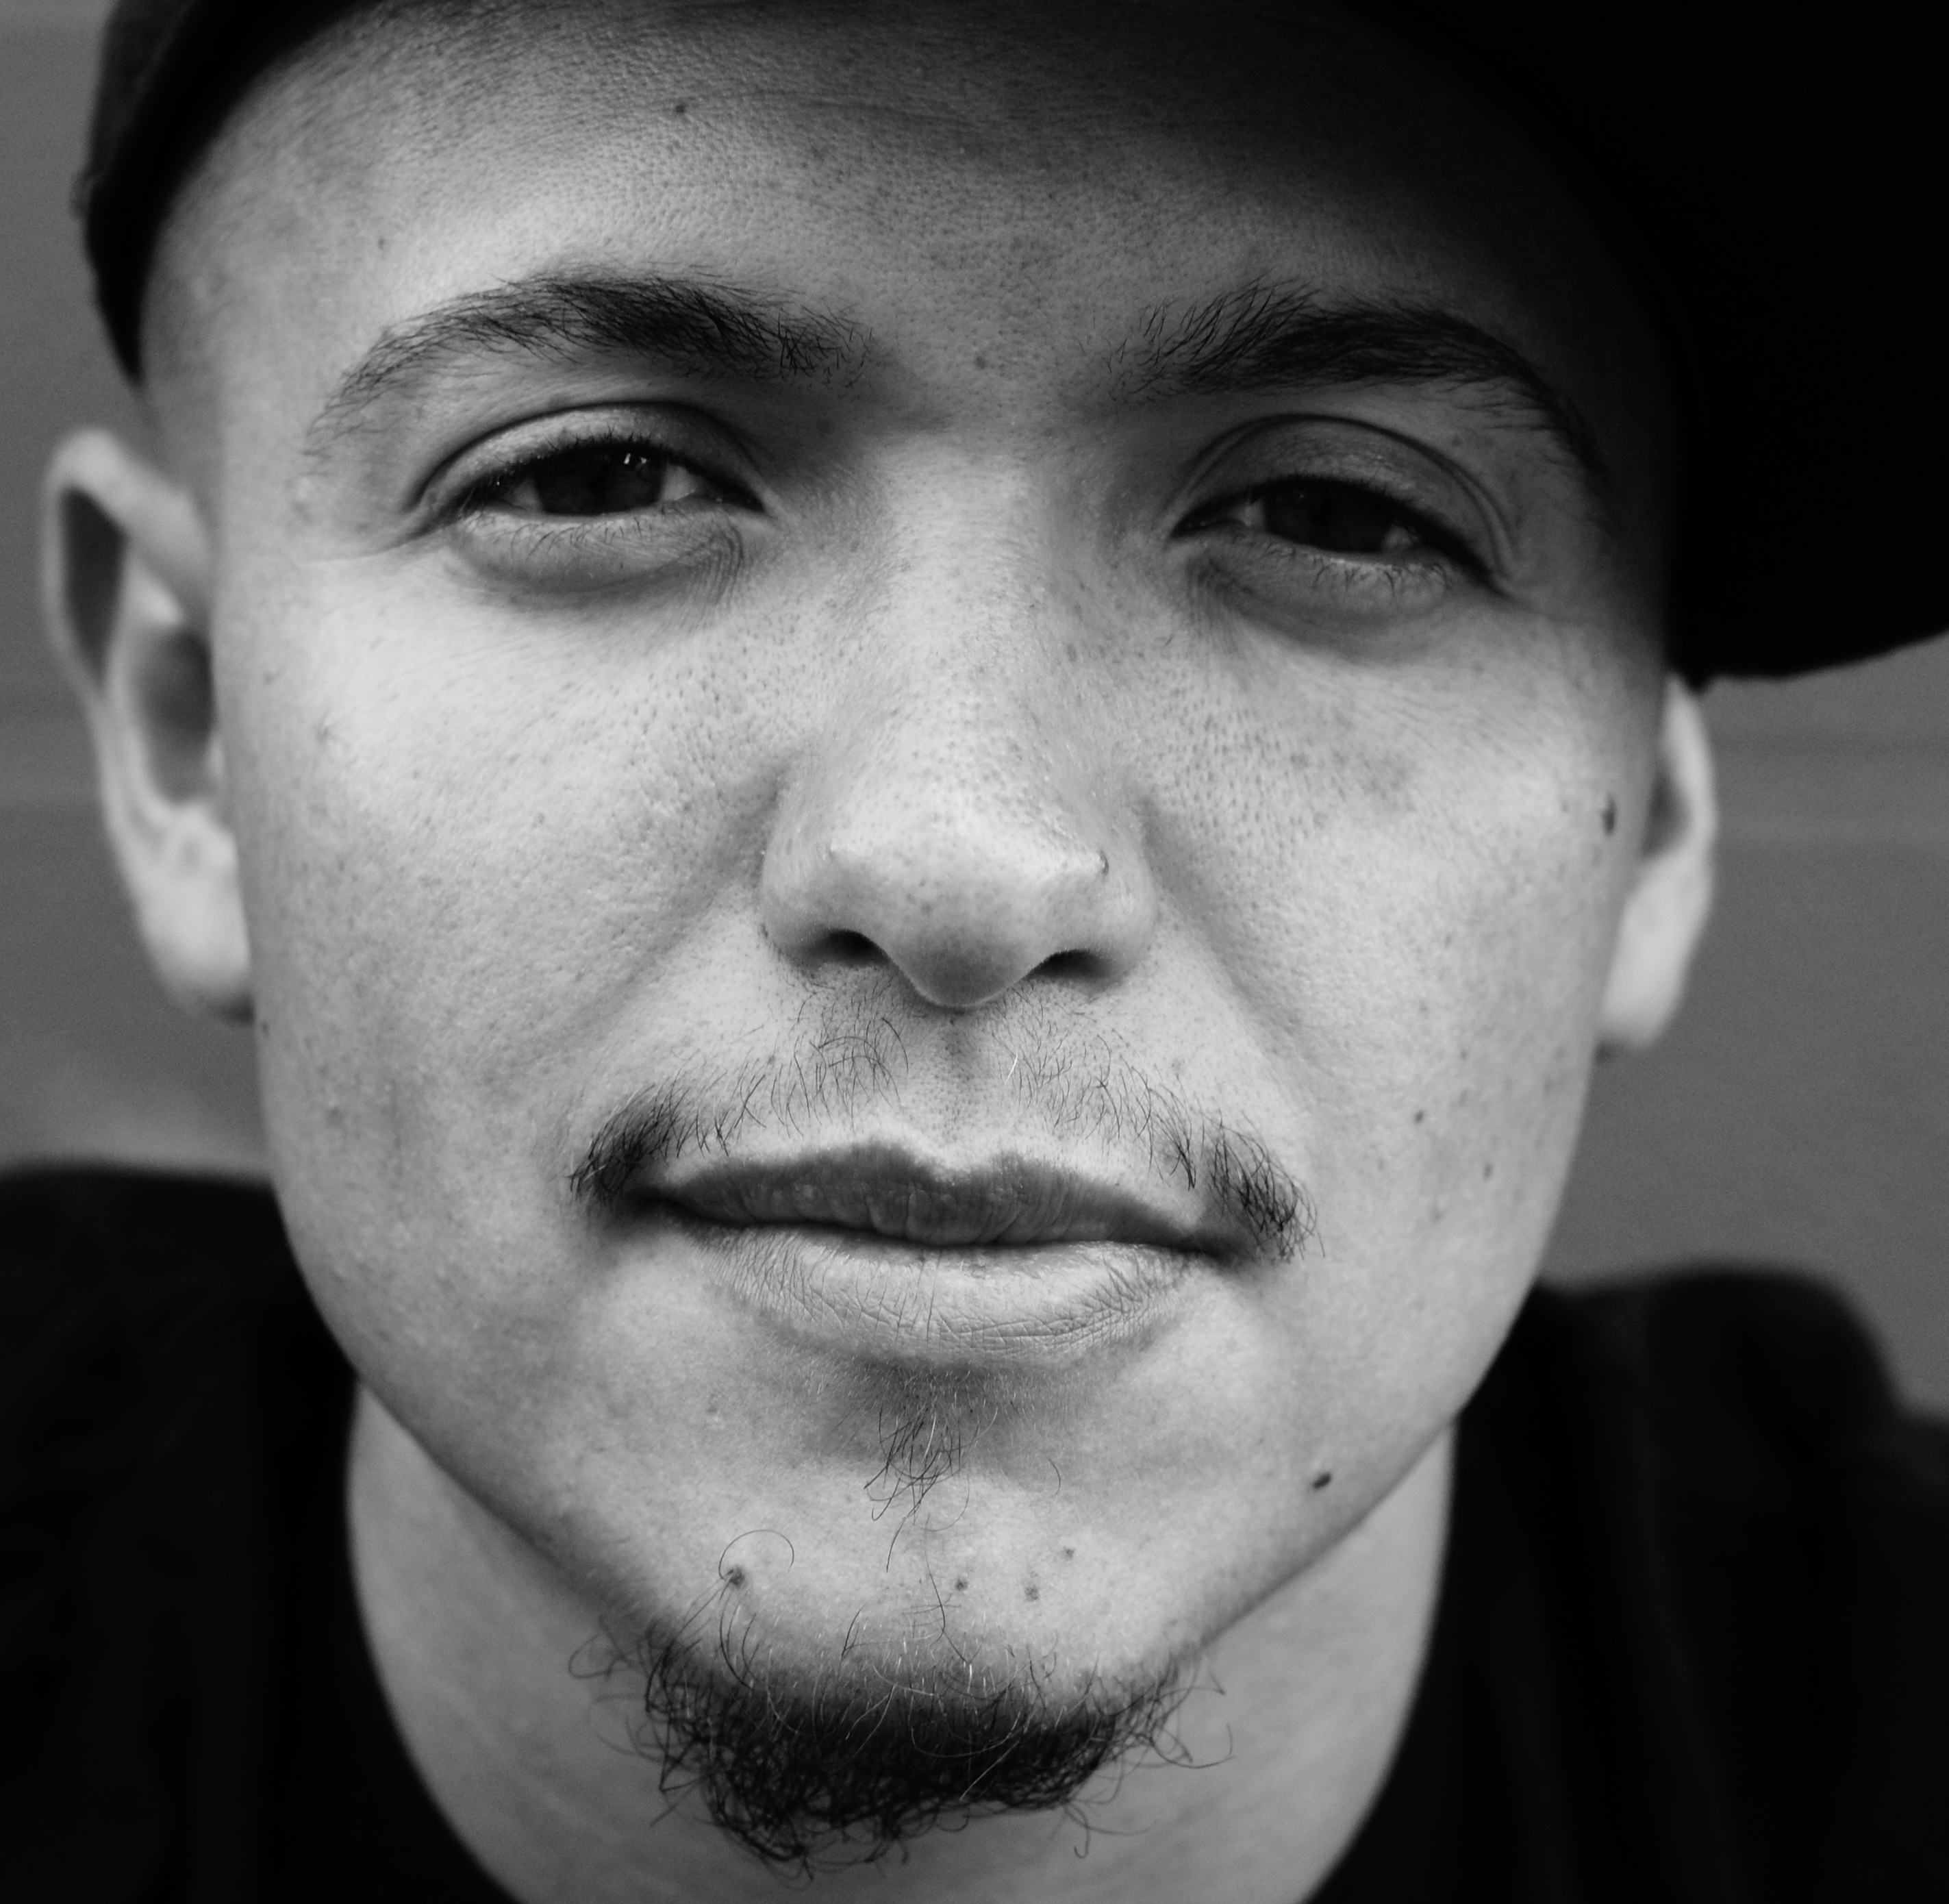 ... Molina Speaks has released several poetry collections and nearly a dozen music projects, spanning the genres of Hip-Hop, Latino, Jazz and Spoken Word, ... - molina-speaks-2013